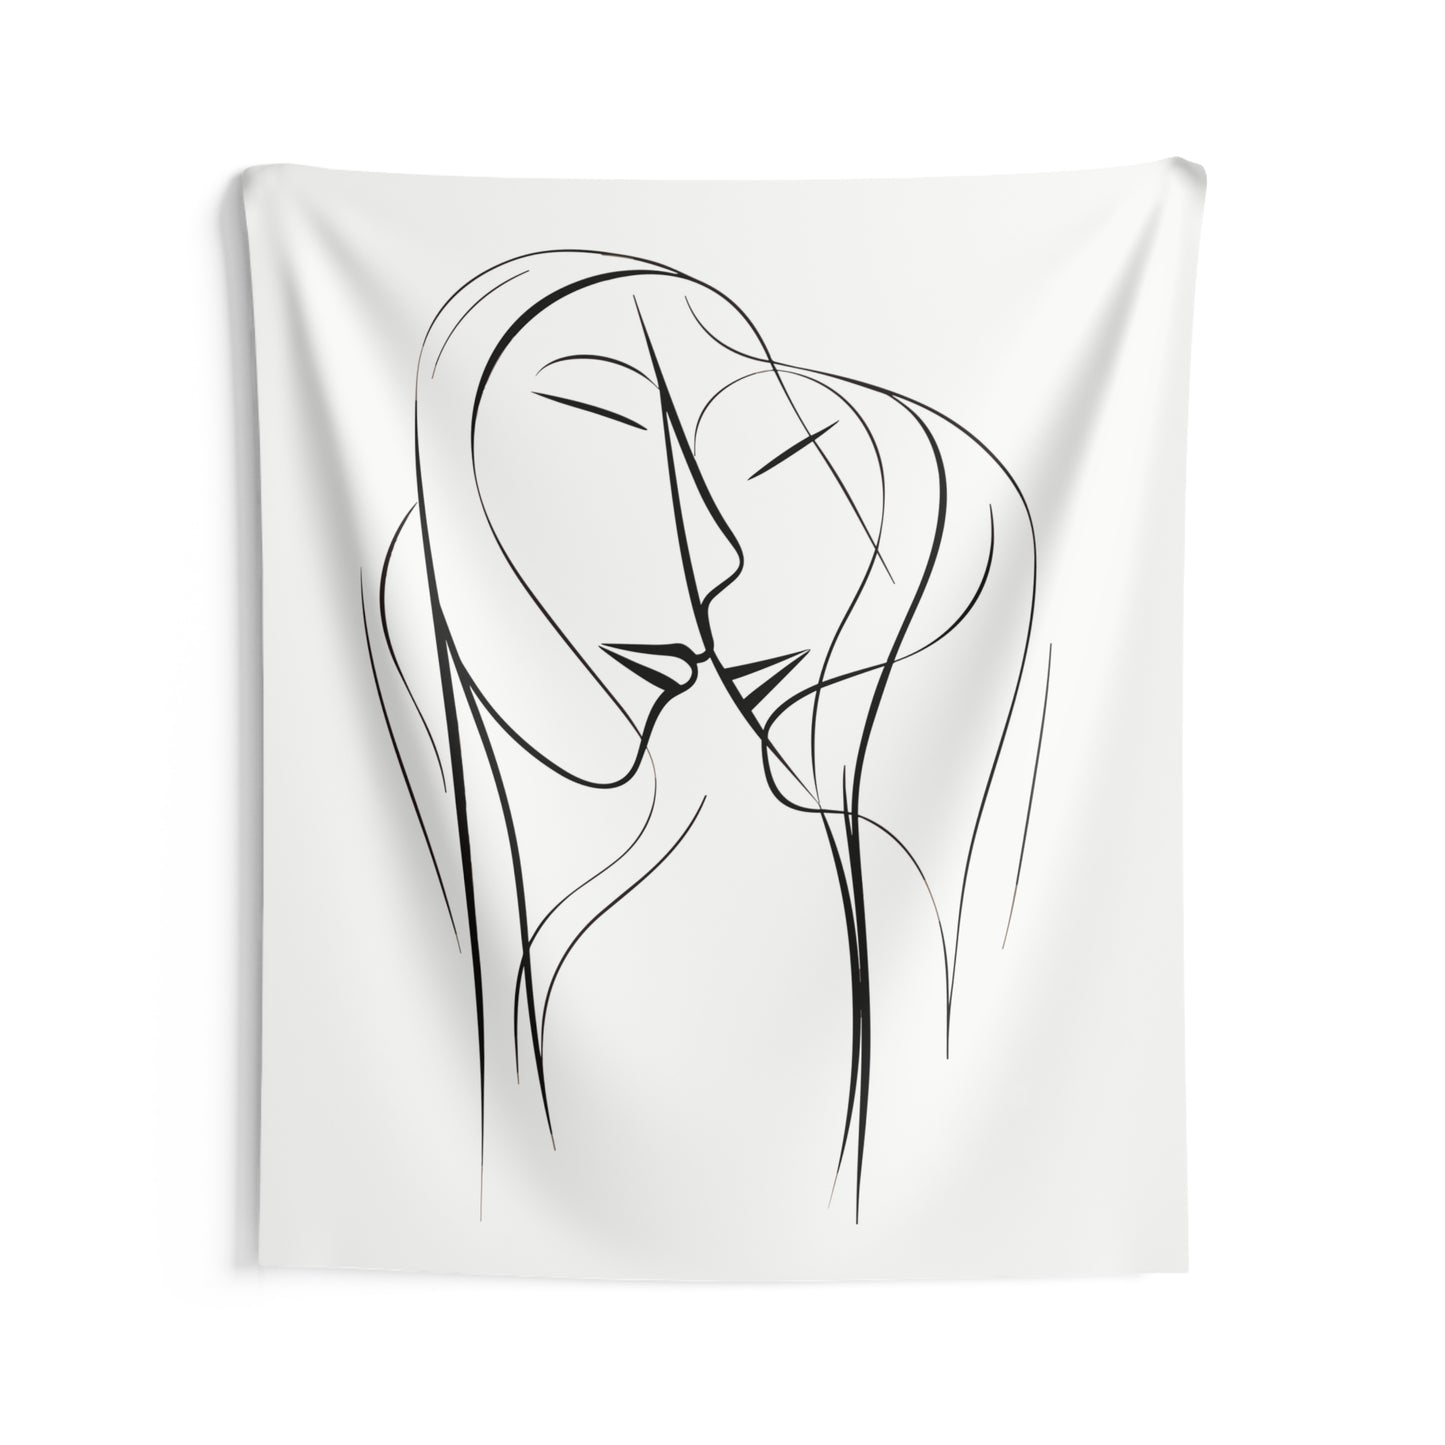 Line Art Lovers Tapestry, Minimalist Abstract Single Line Wall Art Hanging Cool Unique Vertical Aesthetic Large Small Bedroom College Dorm Starcove Fashion